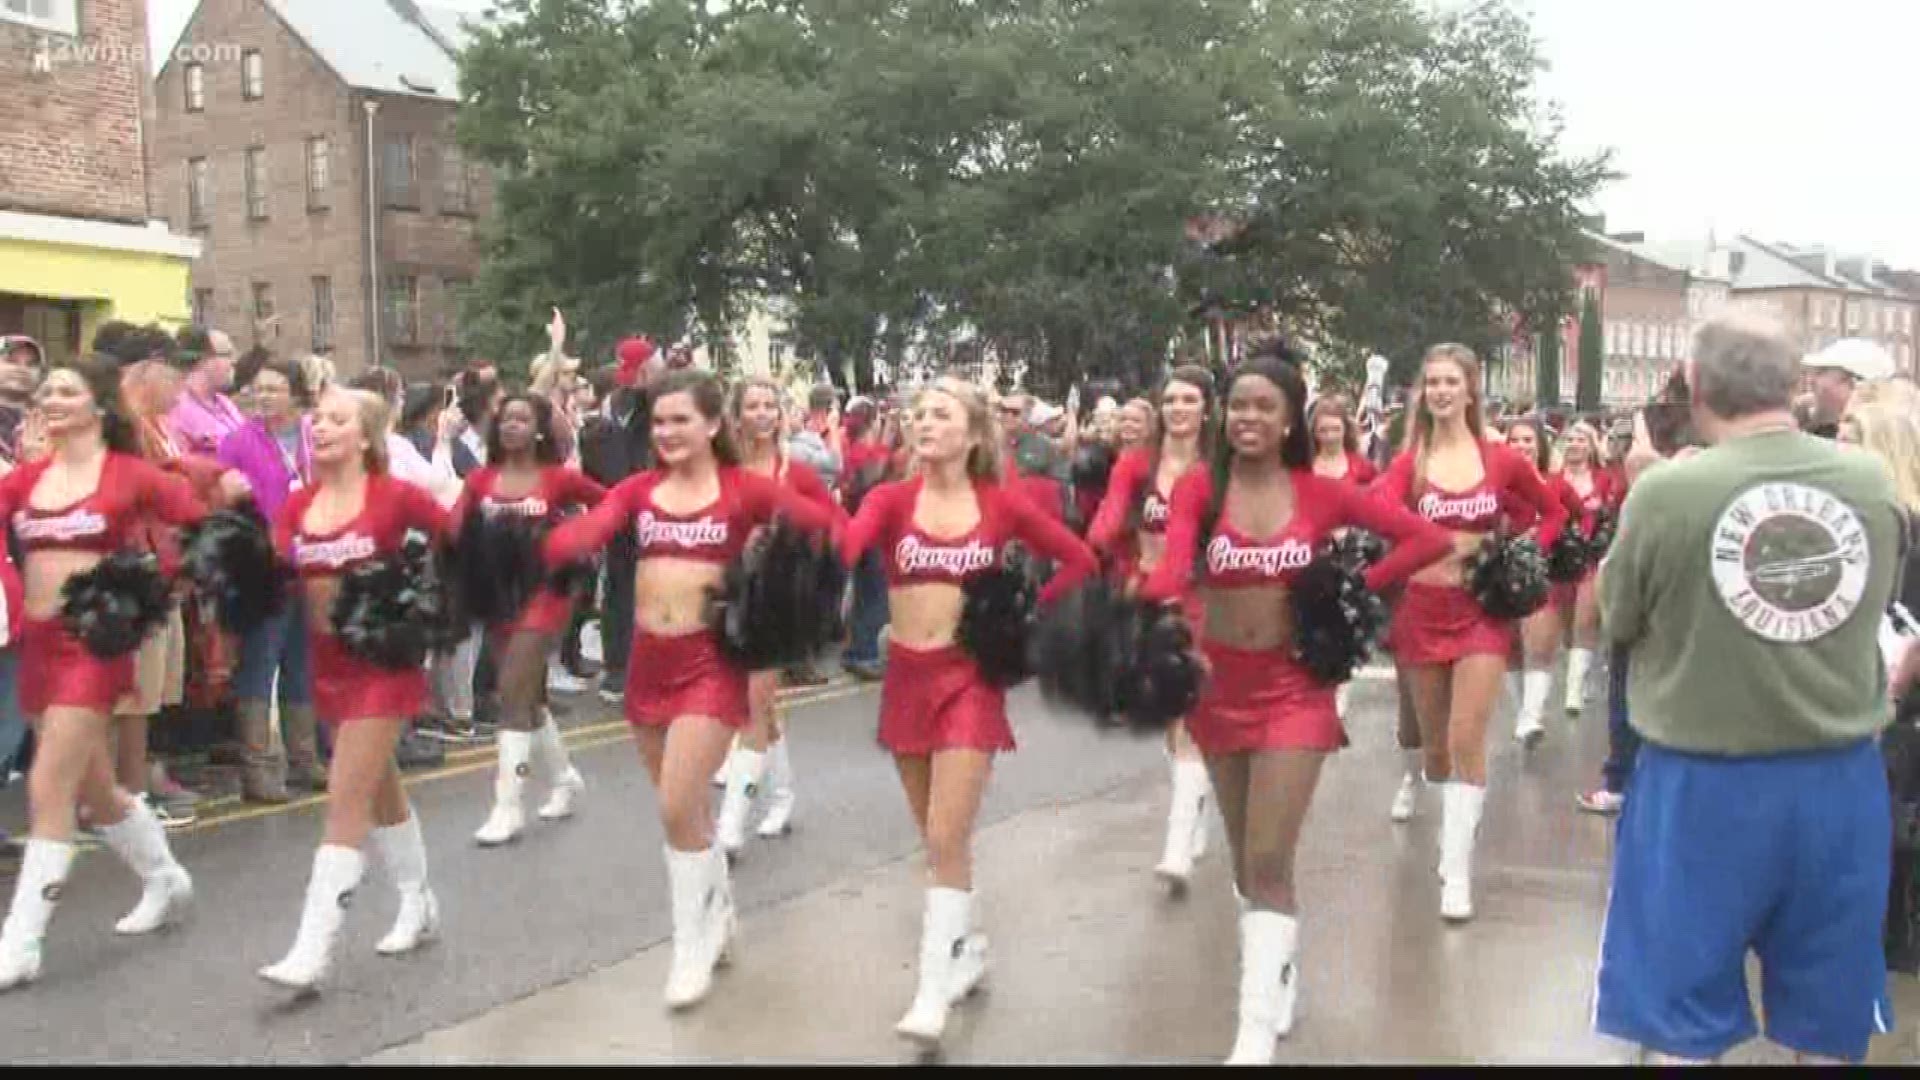 Fans took to the streets of New Orleans for a parade a day before the big game.